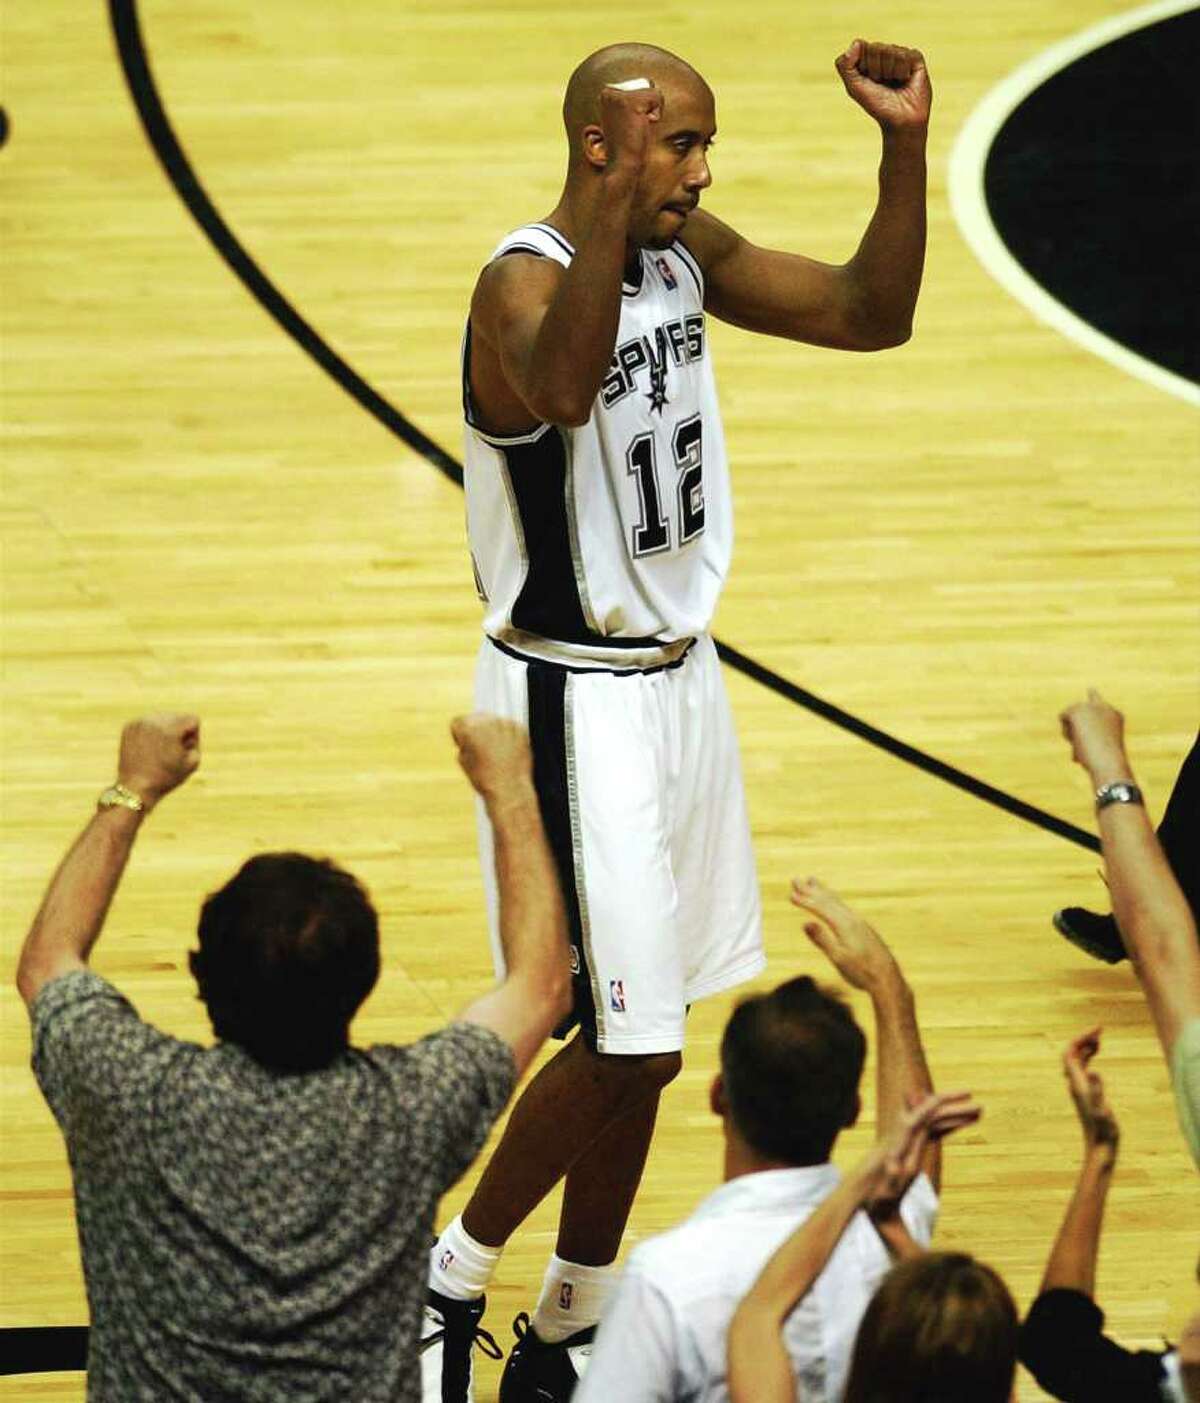 Spurs Bruce Bowen celebrates the Spurs narrow vistory over the Lakers as fans react also during Game 5 of the Western Conference Semifinals at the SBC Center in San Antonio, TX Tuesday May 13, 2003. PHOTO BY TOM REEL/STAFF